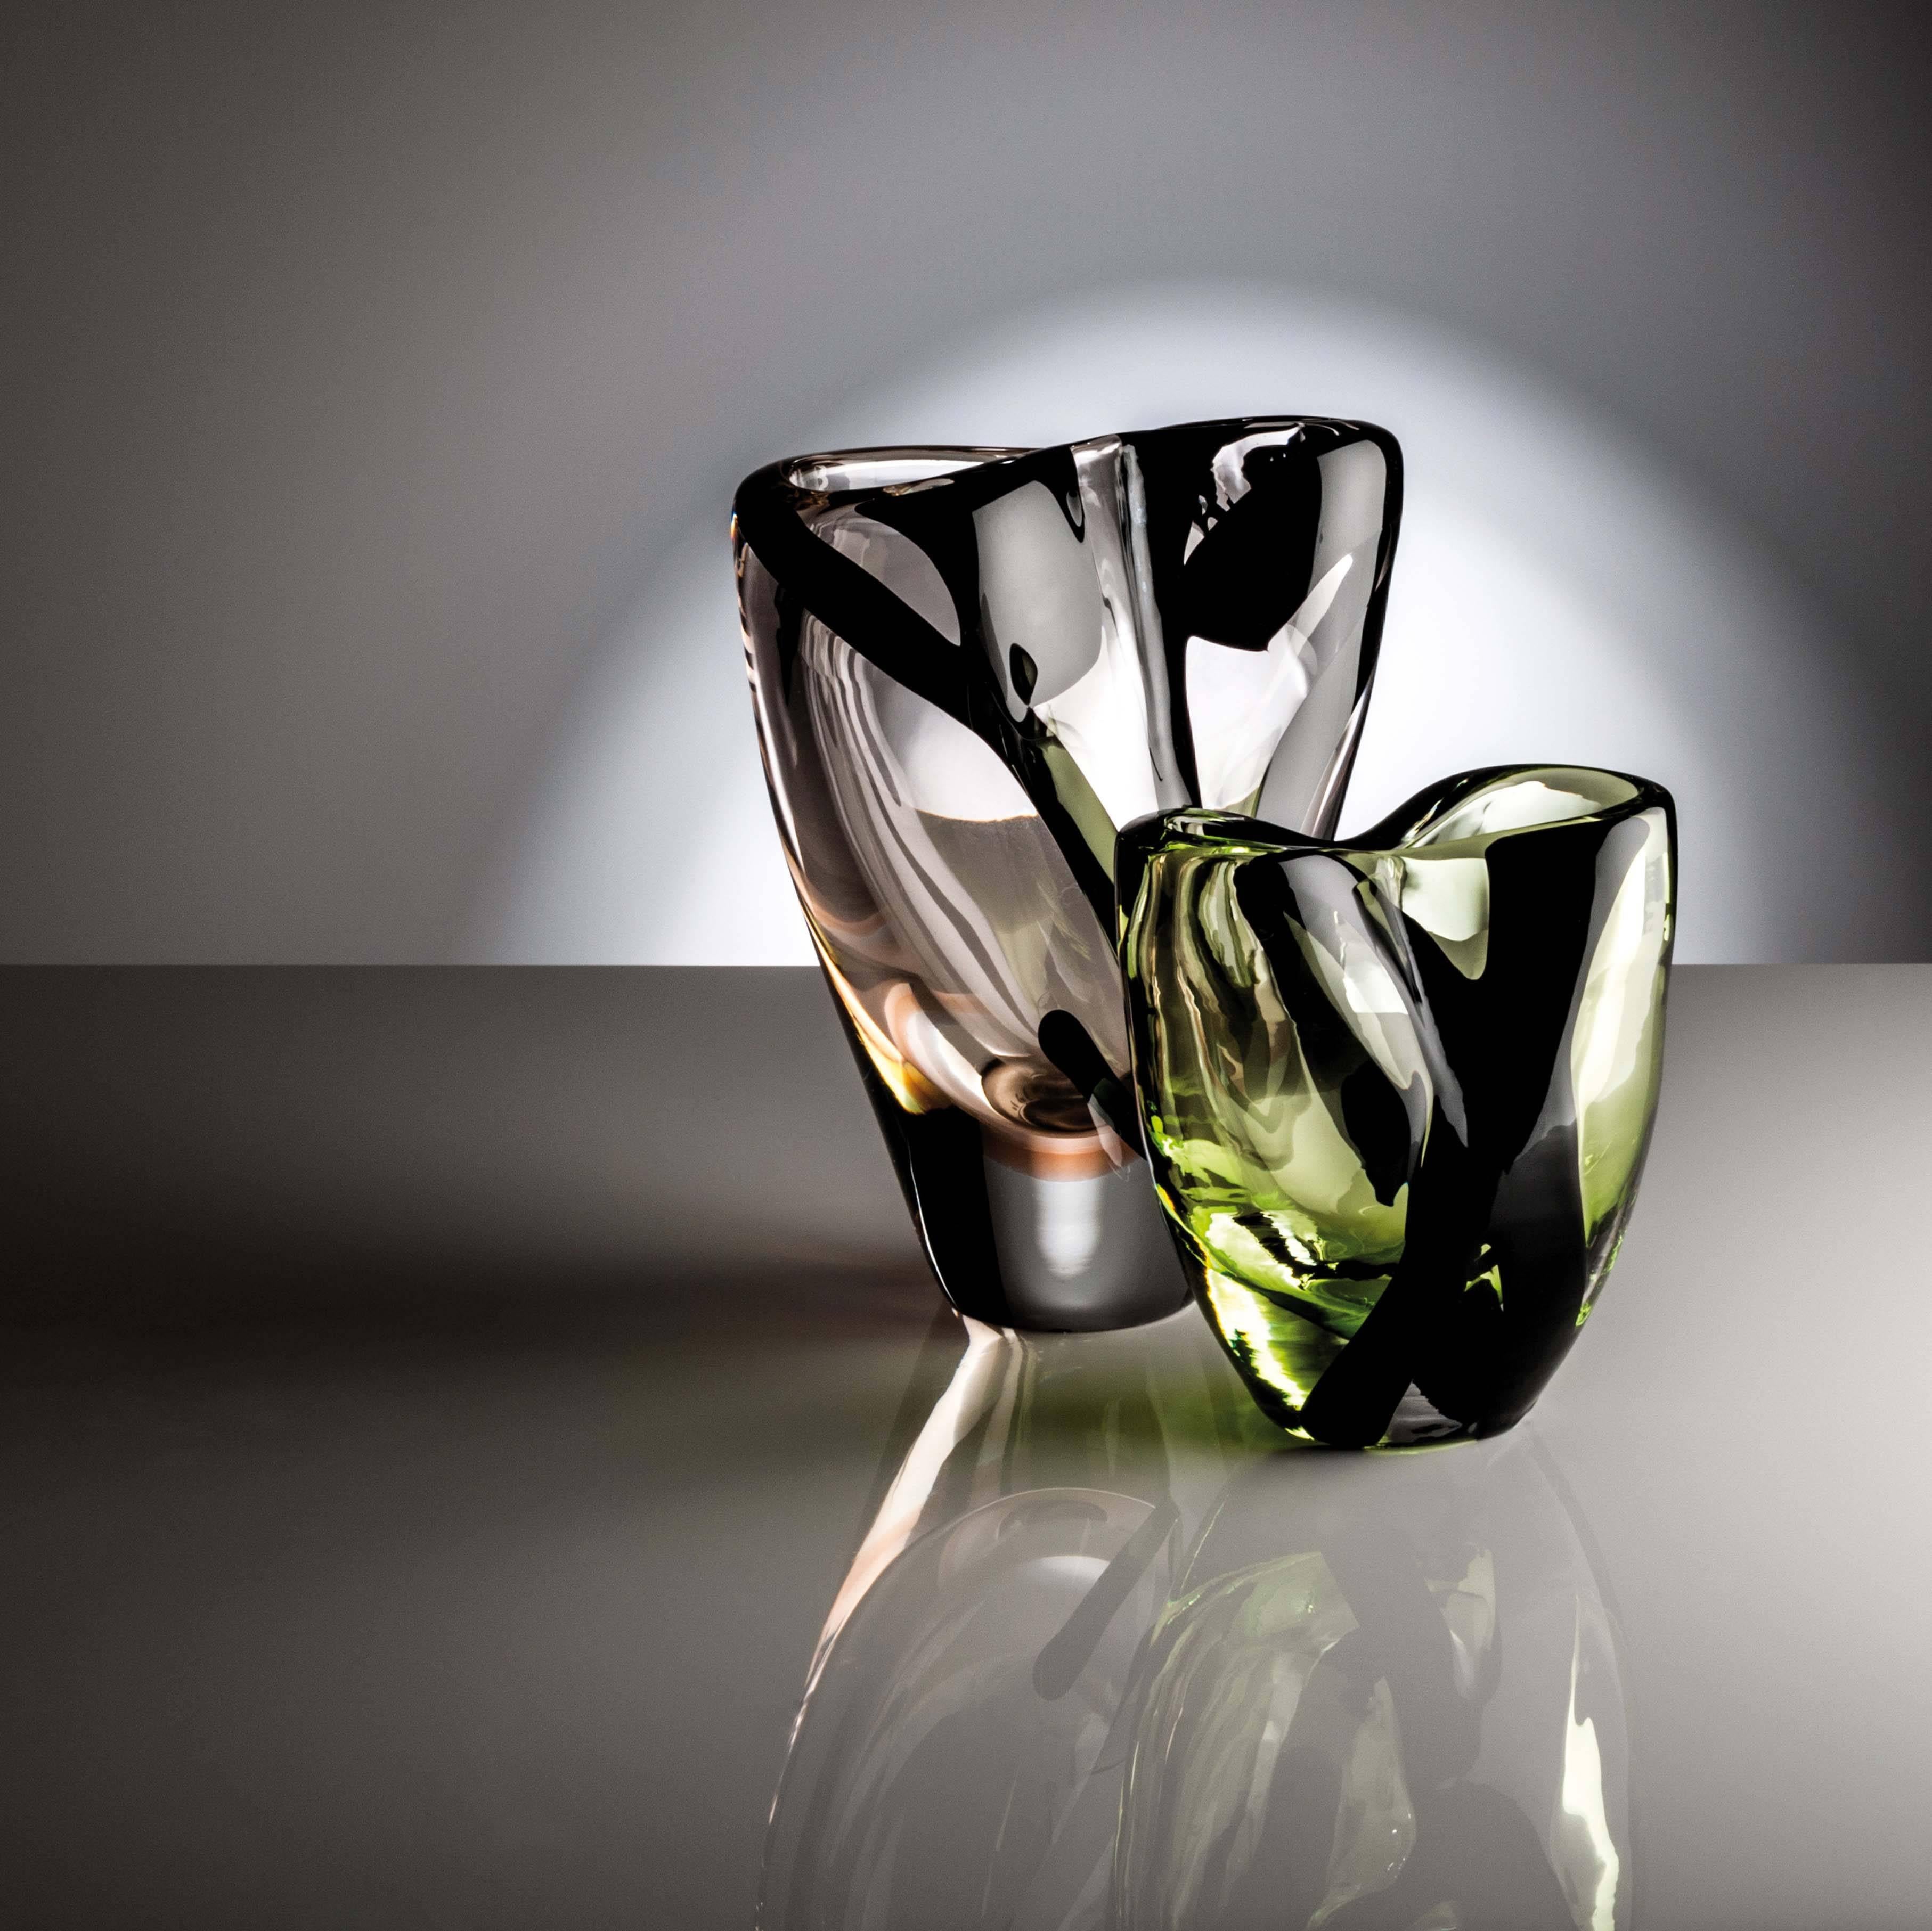 The vases from Peter Marino’s first collection of art glass evolved from his interest in the power of light and materiality. Nuances in their coloring and decoration render each example an individual work of art. The entire collection consists of 15